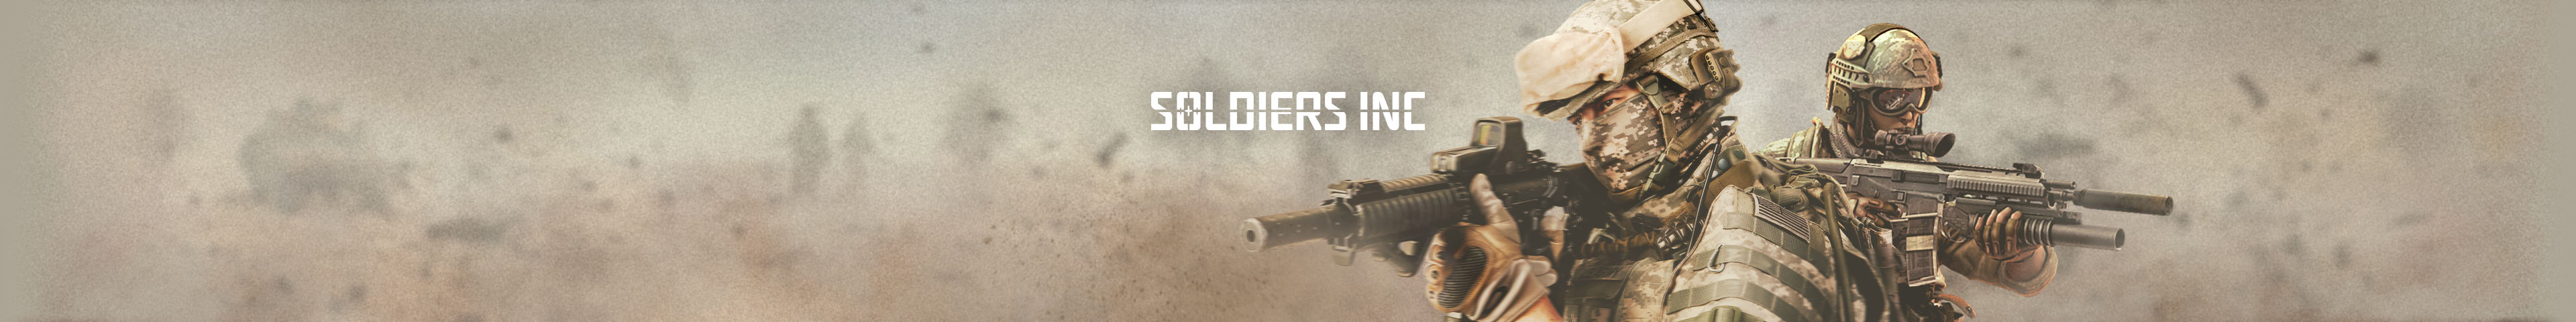 Soldiers Inc. Forum